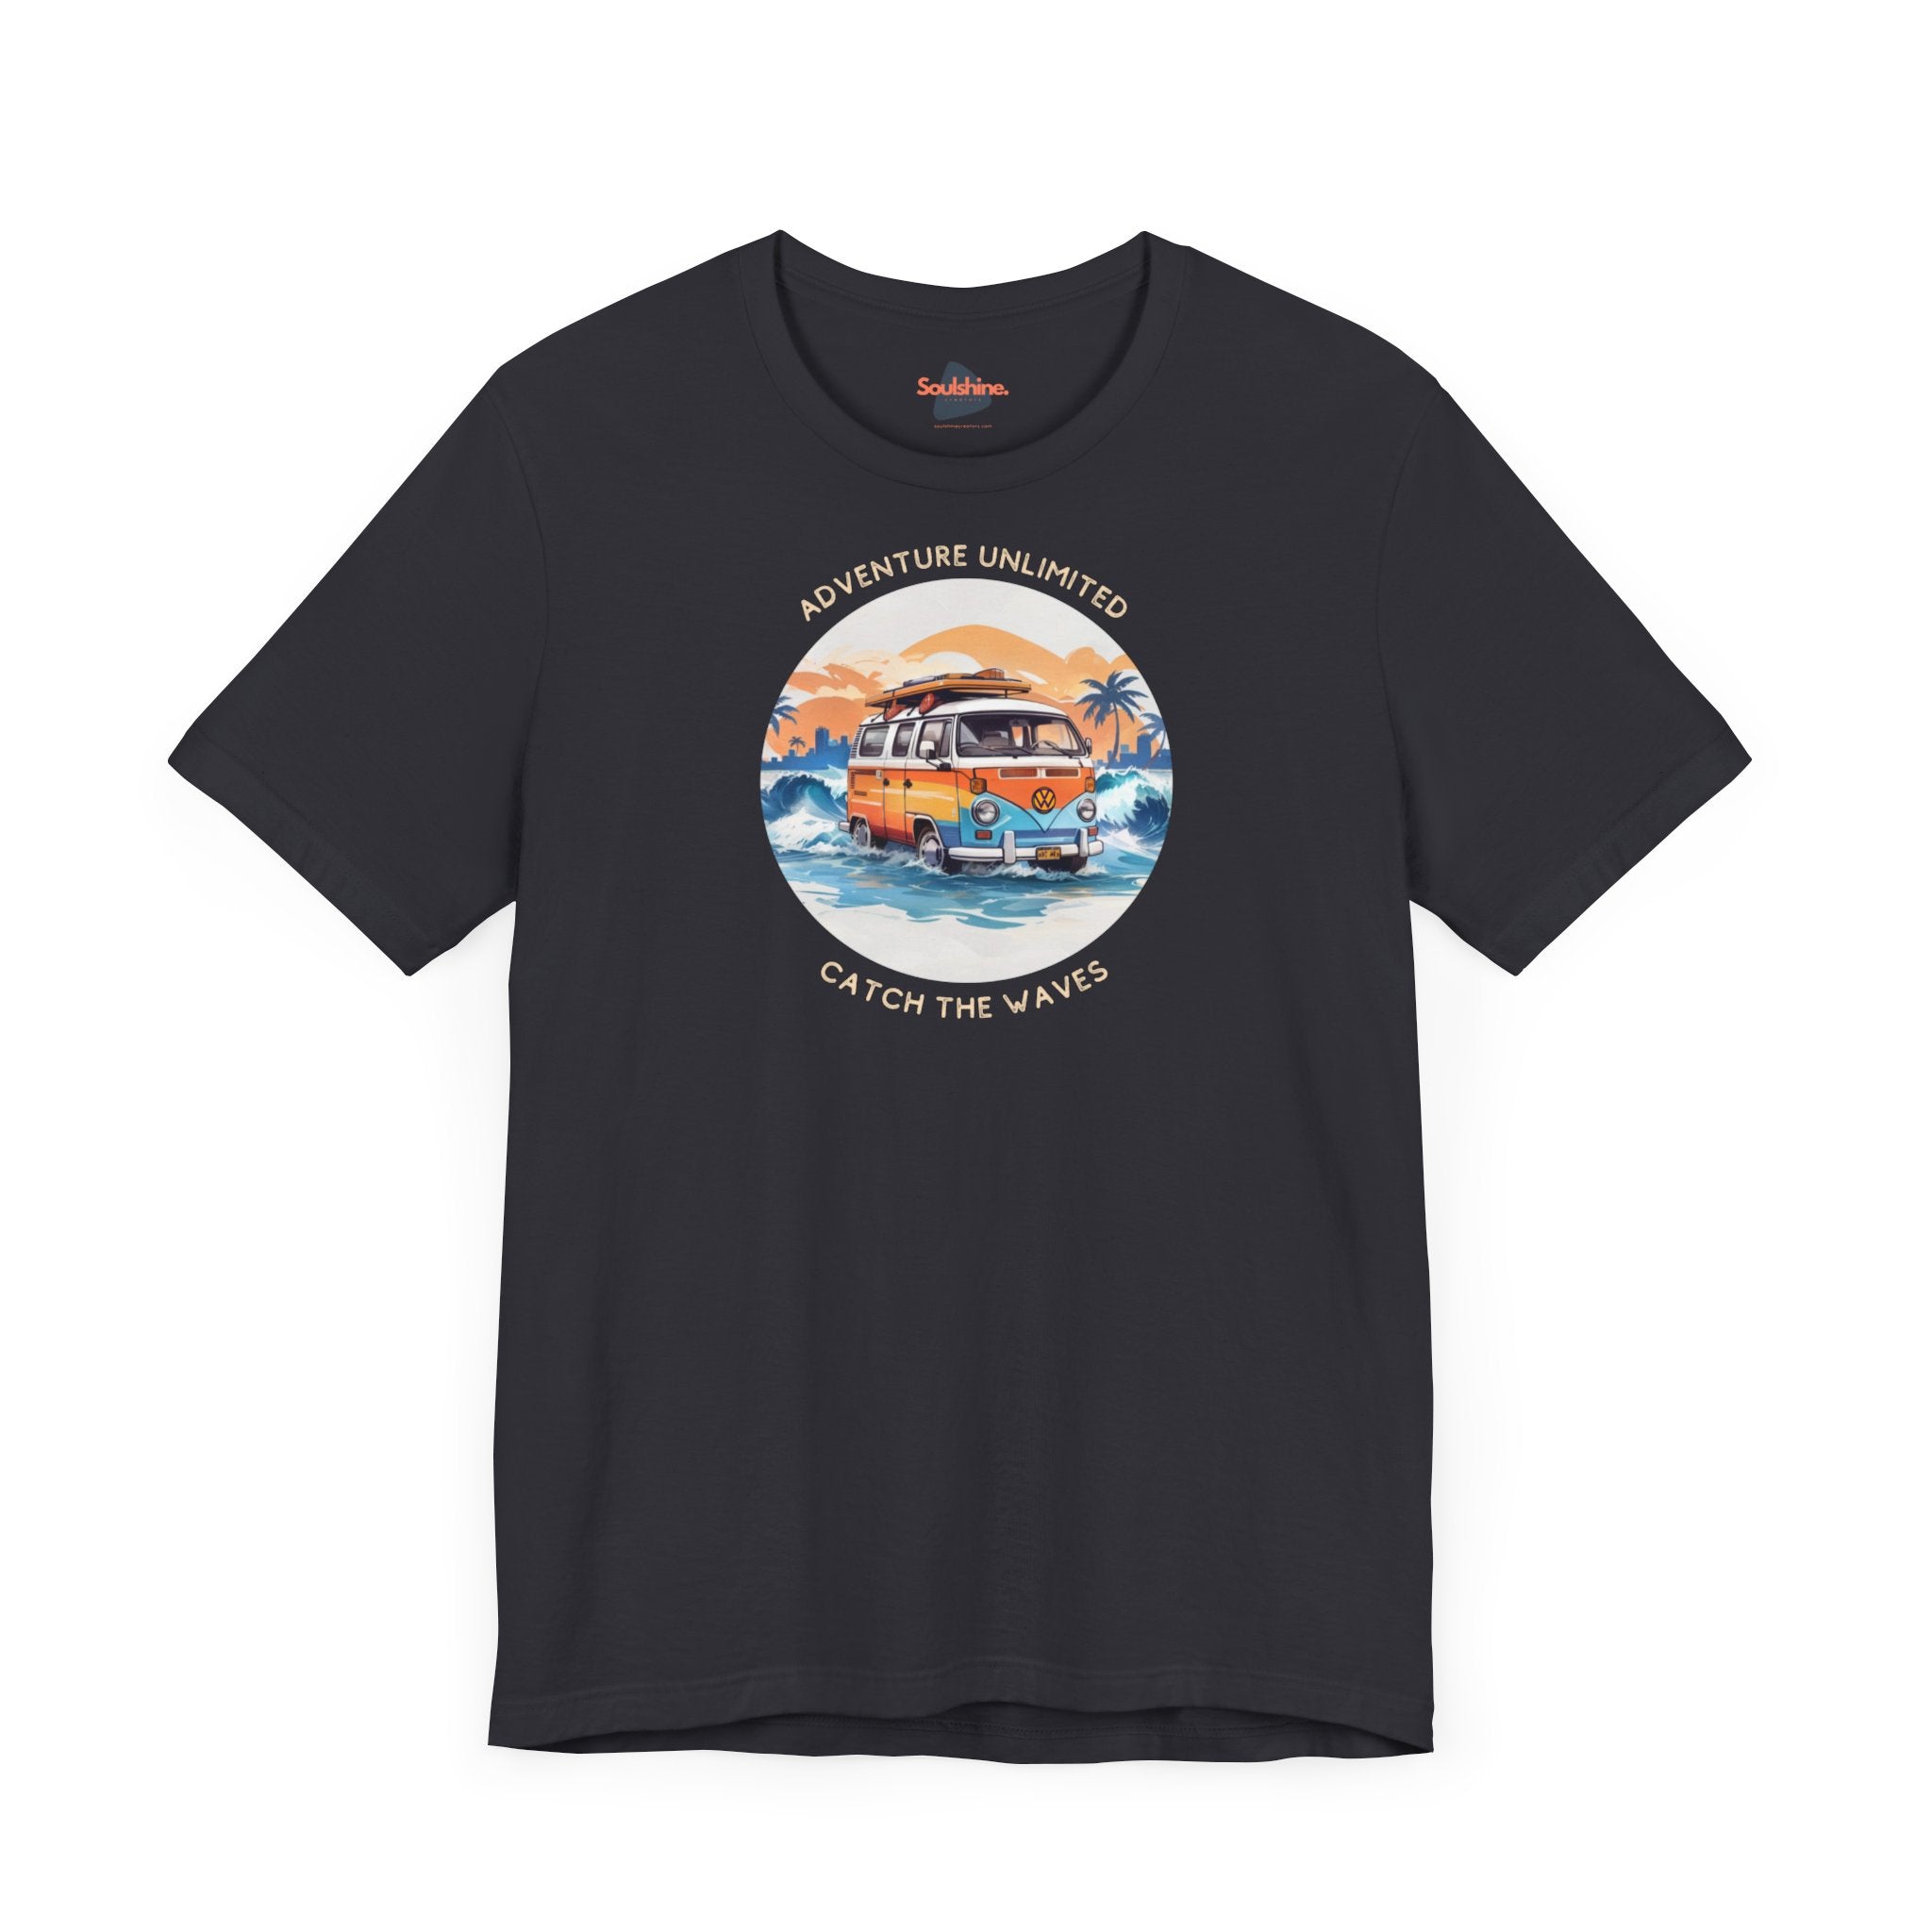 Adventure Unlimited - Surfing T-Shirt - printed black tee with ’Soulshinecreators’ design